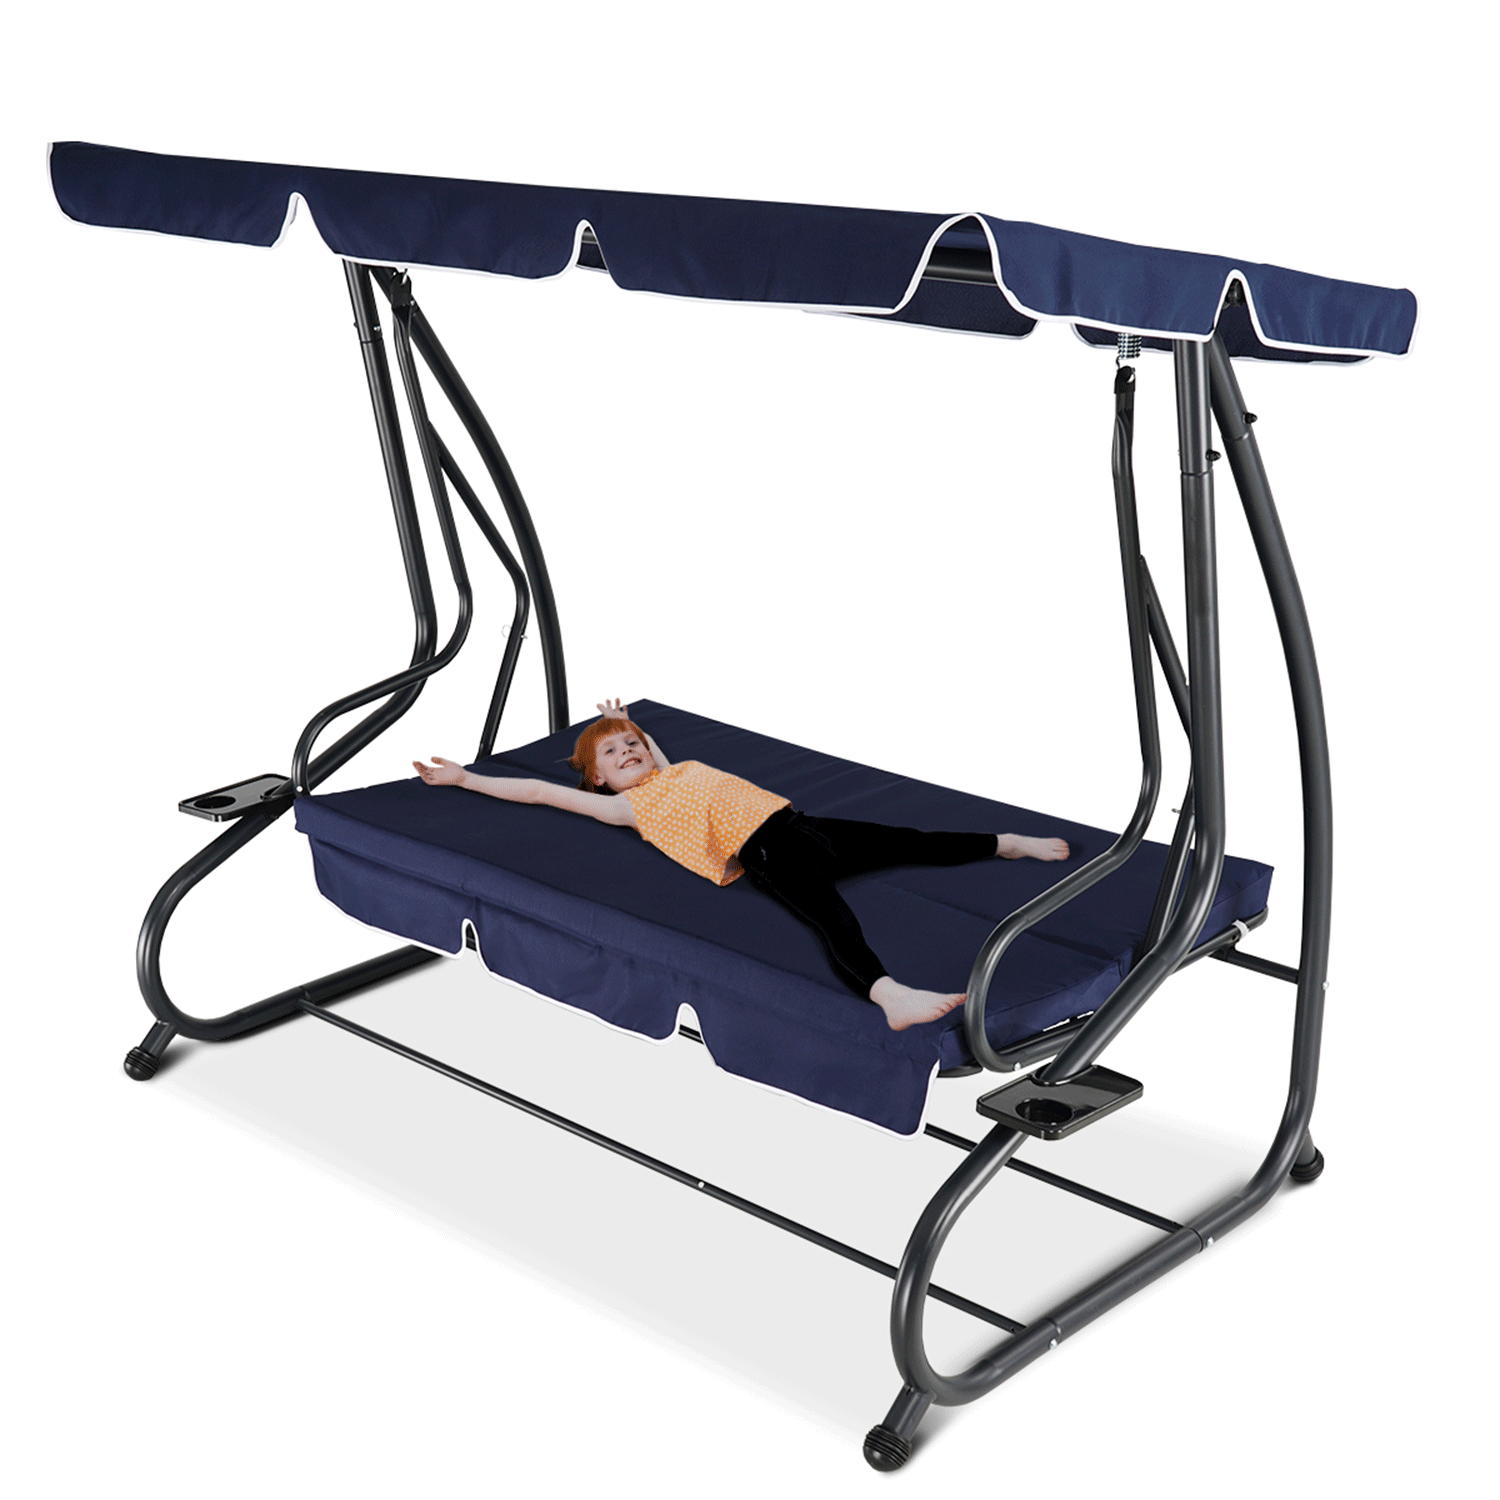 Outdoor Garden Swing Chair Canopy Bed 3 Seater Patio Hammock Bench Lounger 